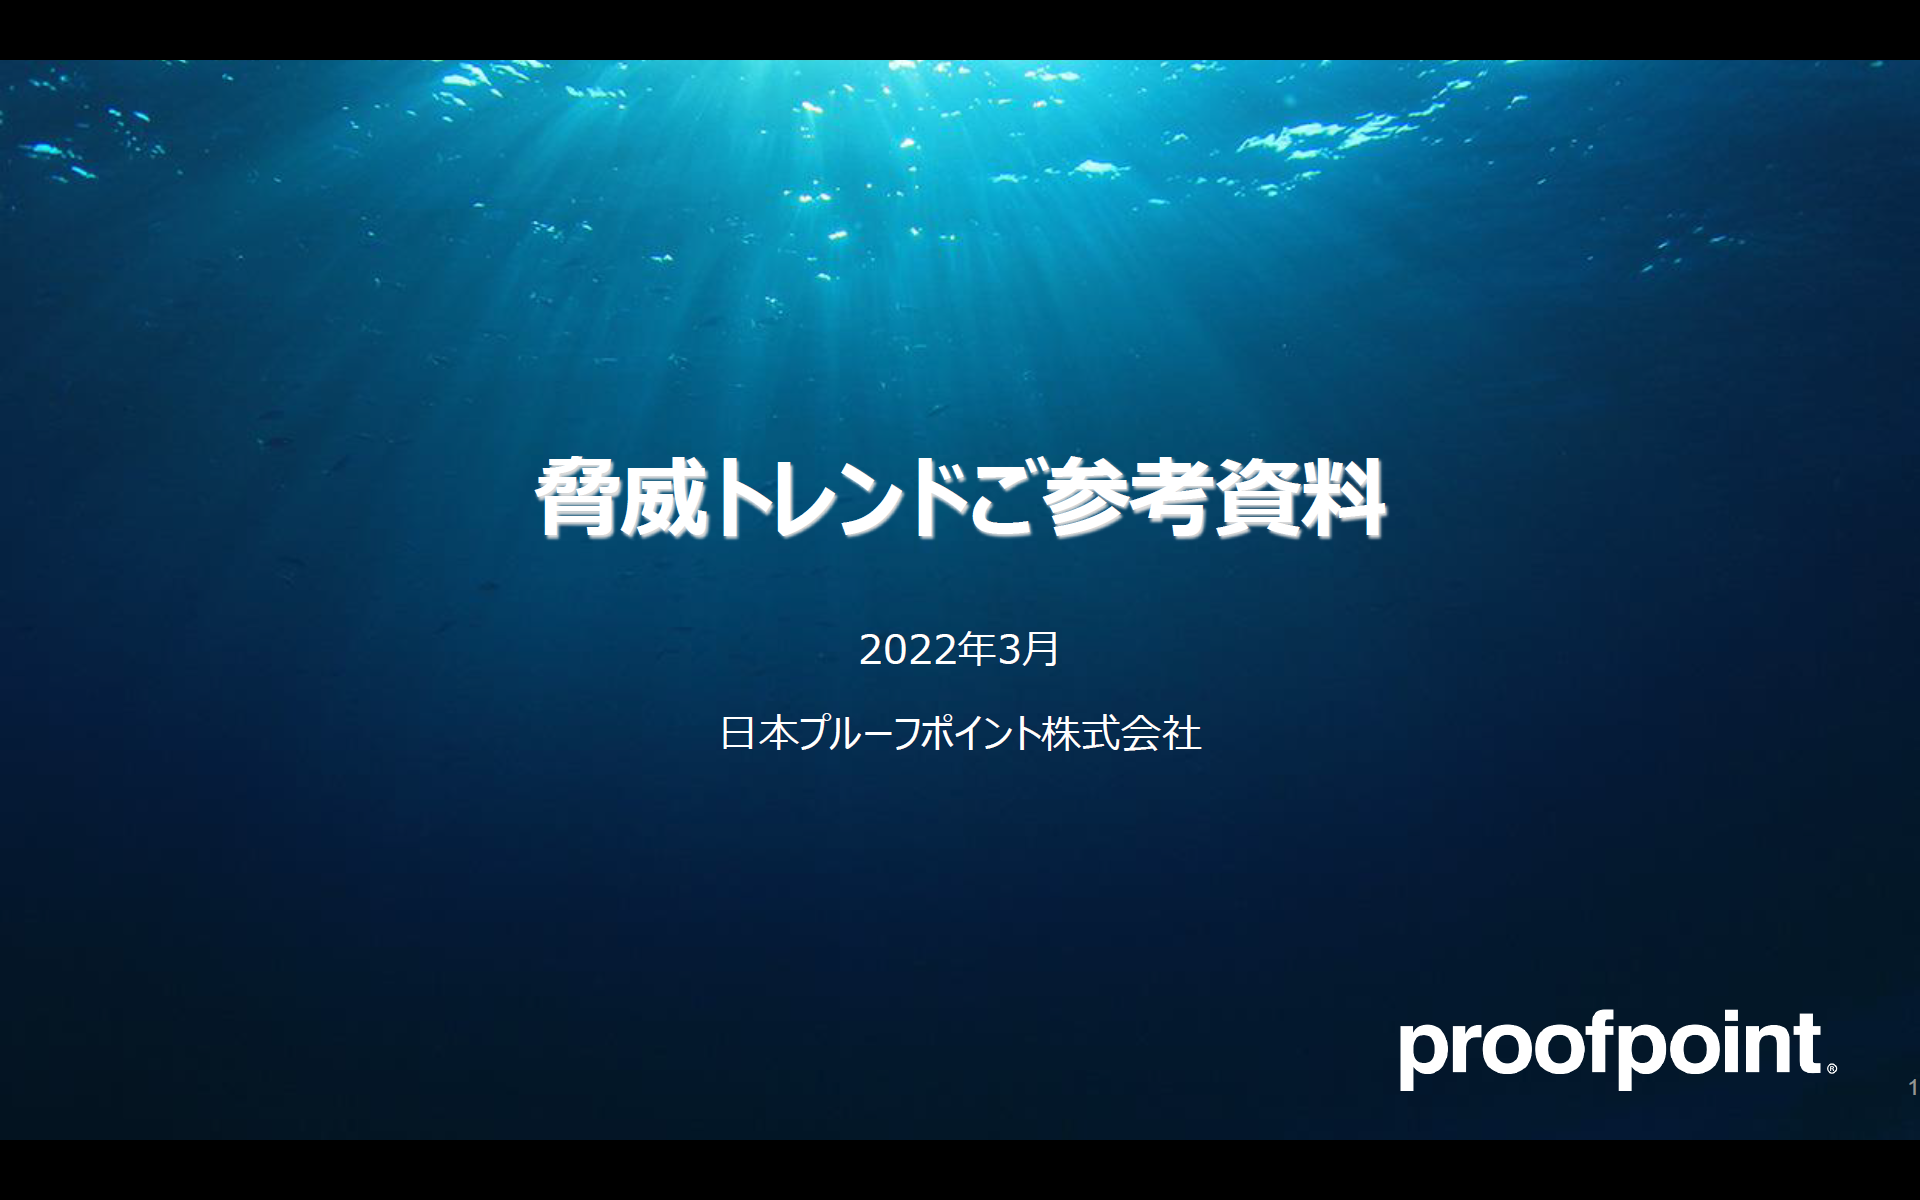 Proofpoint 最新脅威トレンドご参考資料